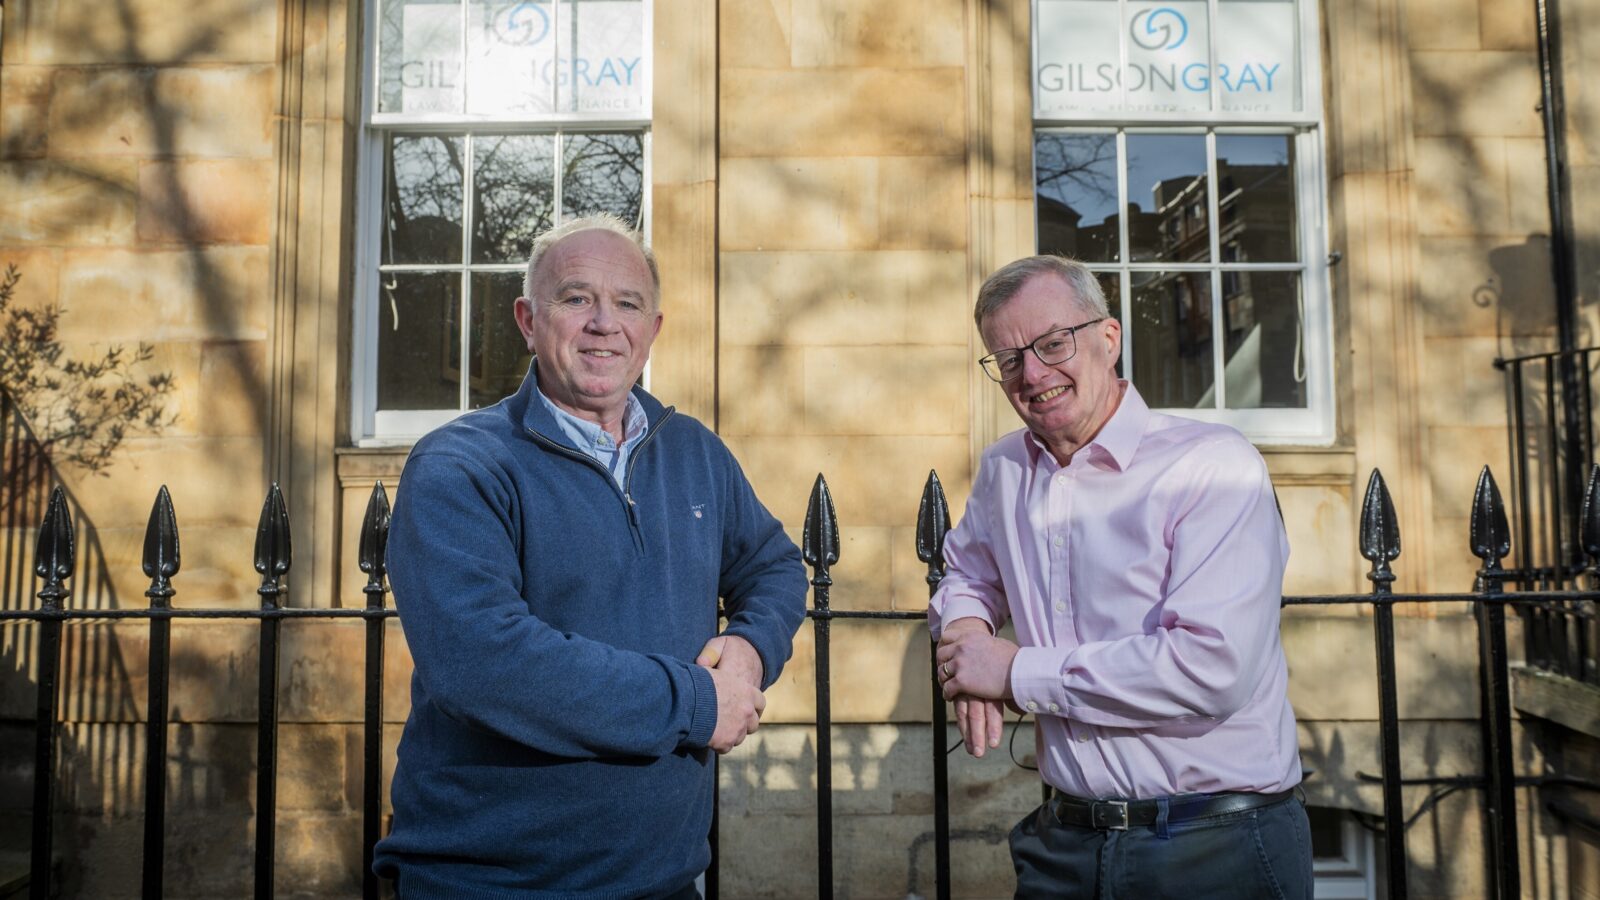 Gilson Gray continues expansion with acquisition of Edinburgh firm MHD Law